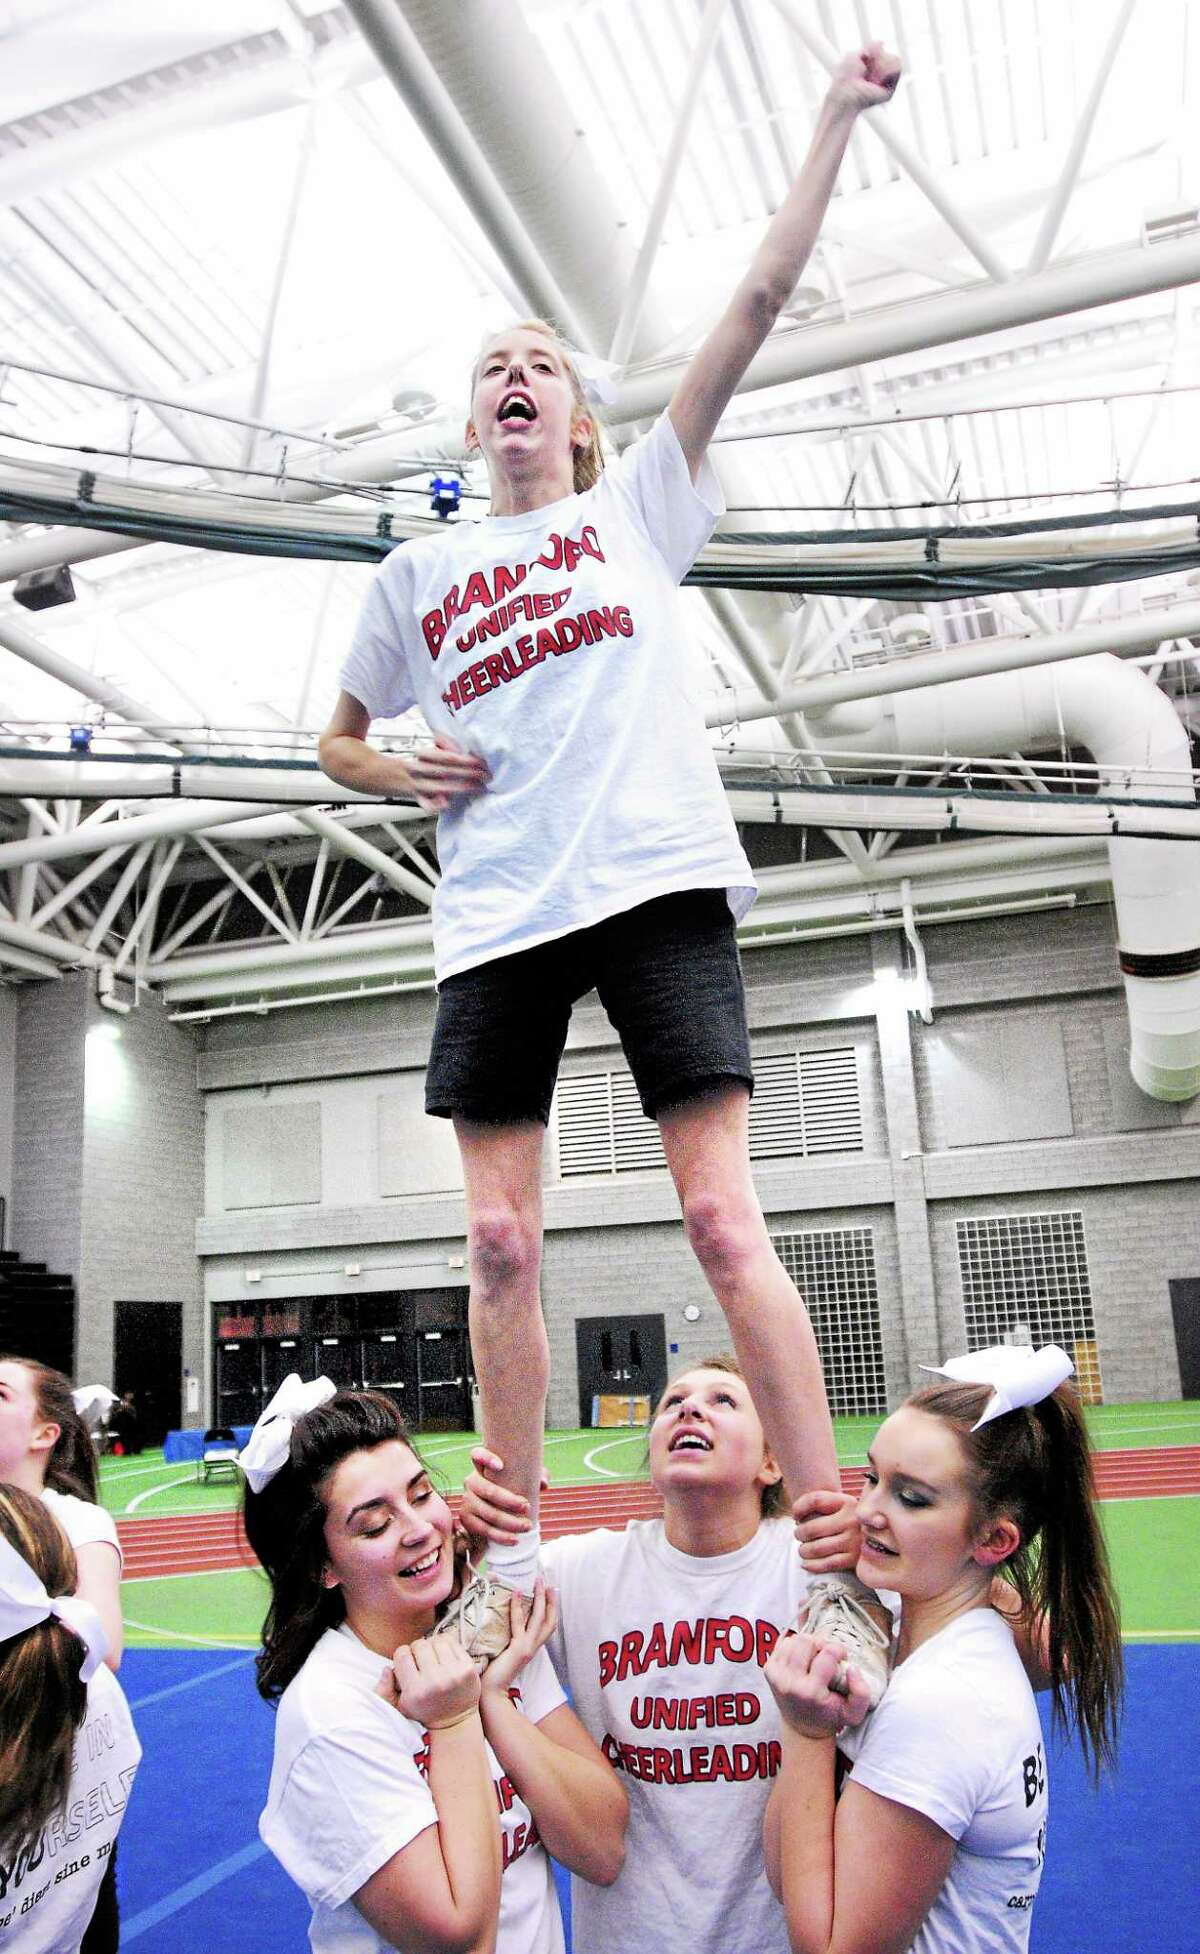 Melissa Weaving of the Branford High School Unified cheerleading team is hoisted into the air during practice before their performance at the CIAC Cheerleading Championships at the Floyd Little Athletic Center in New Haven earlier this month.